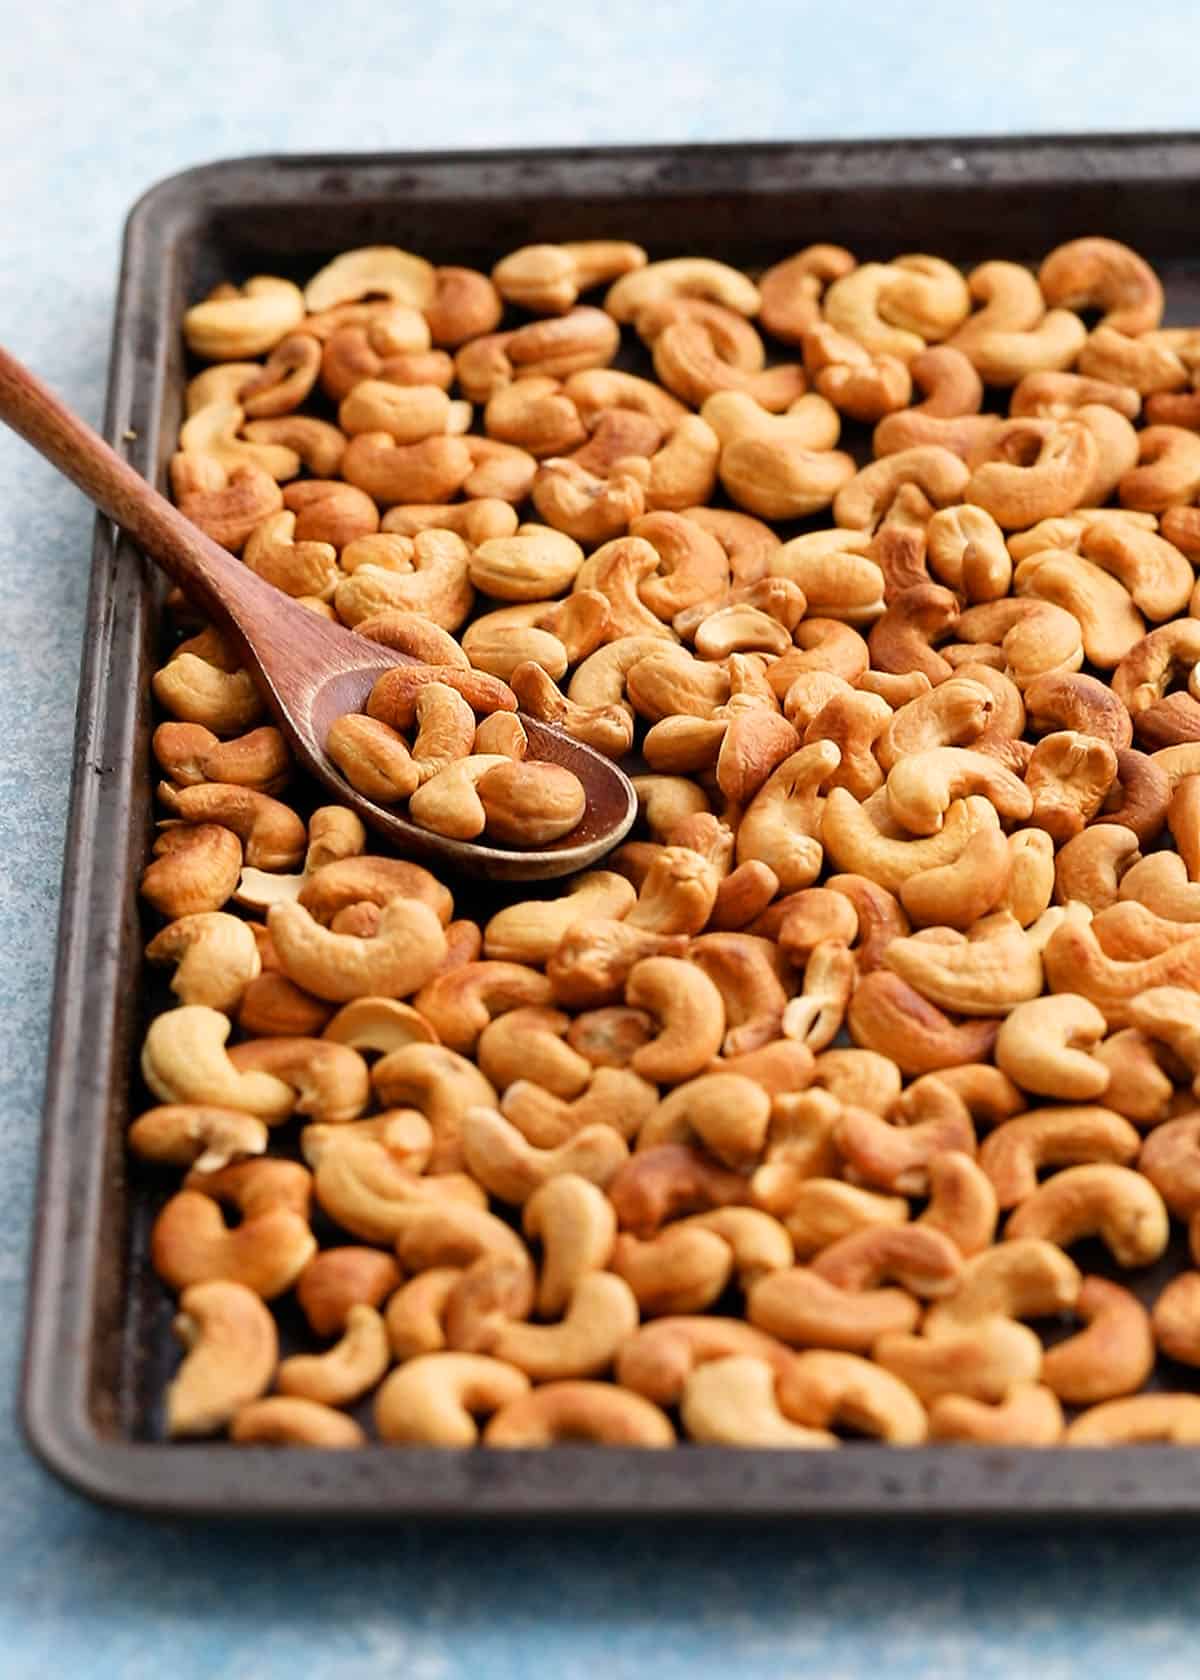 roasted cashews in a metal baking sheet along with wooden spoon.